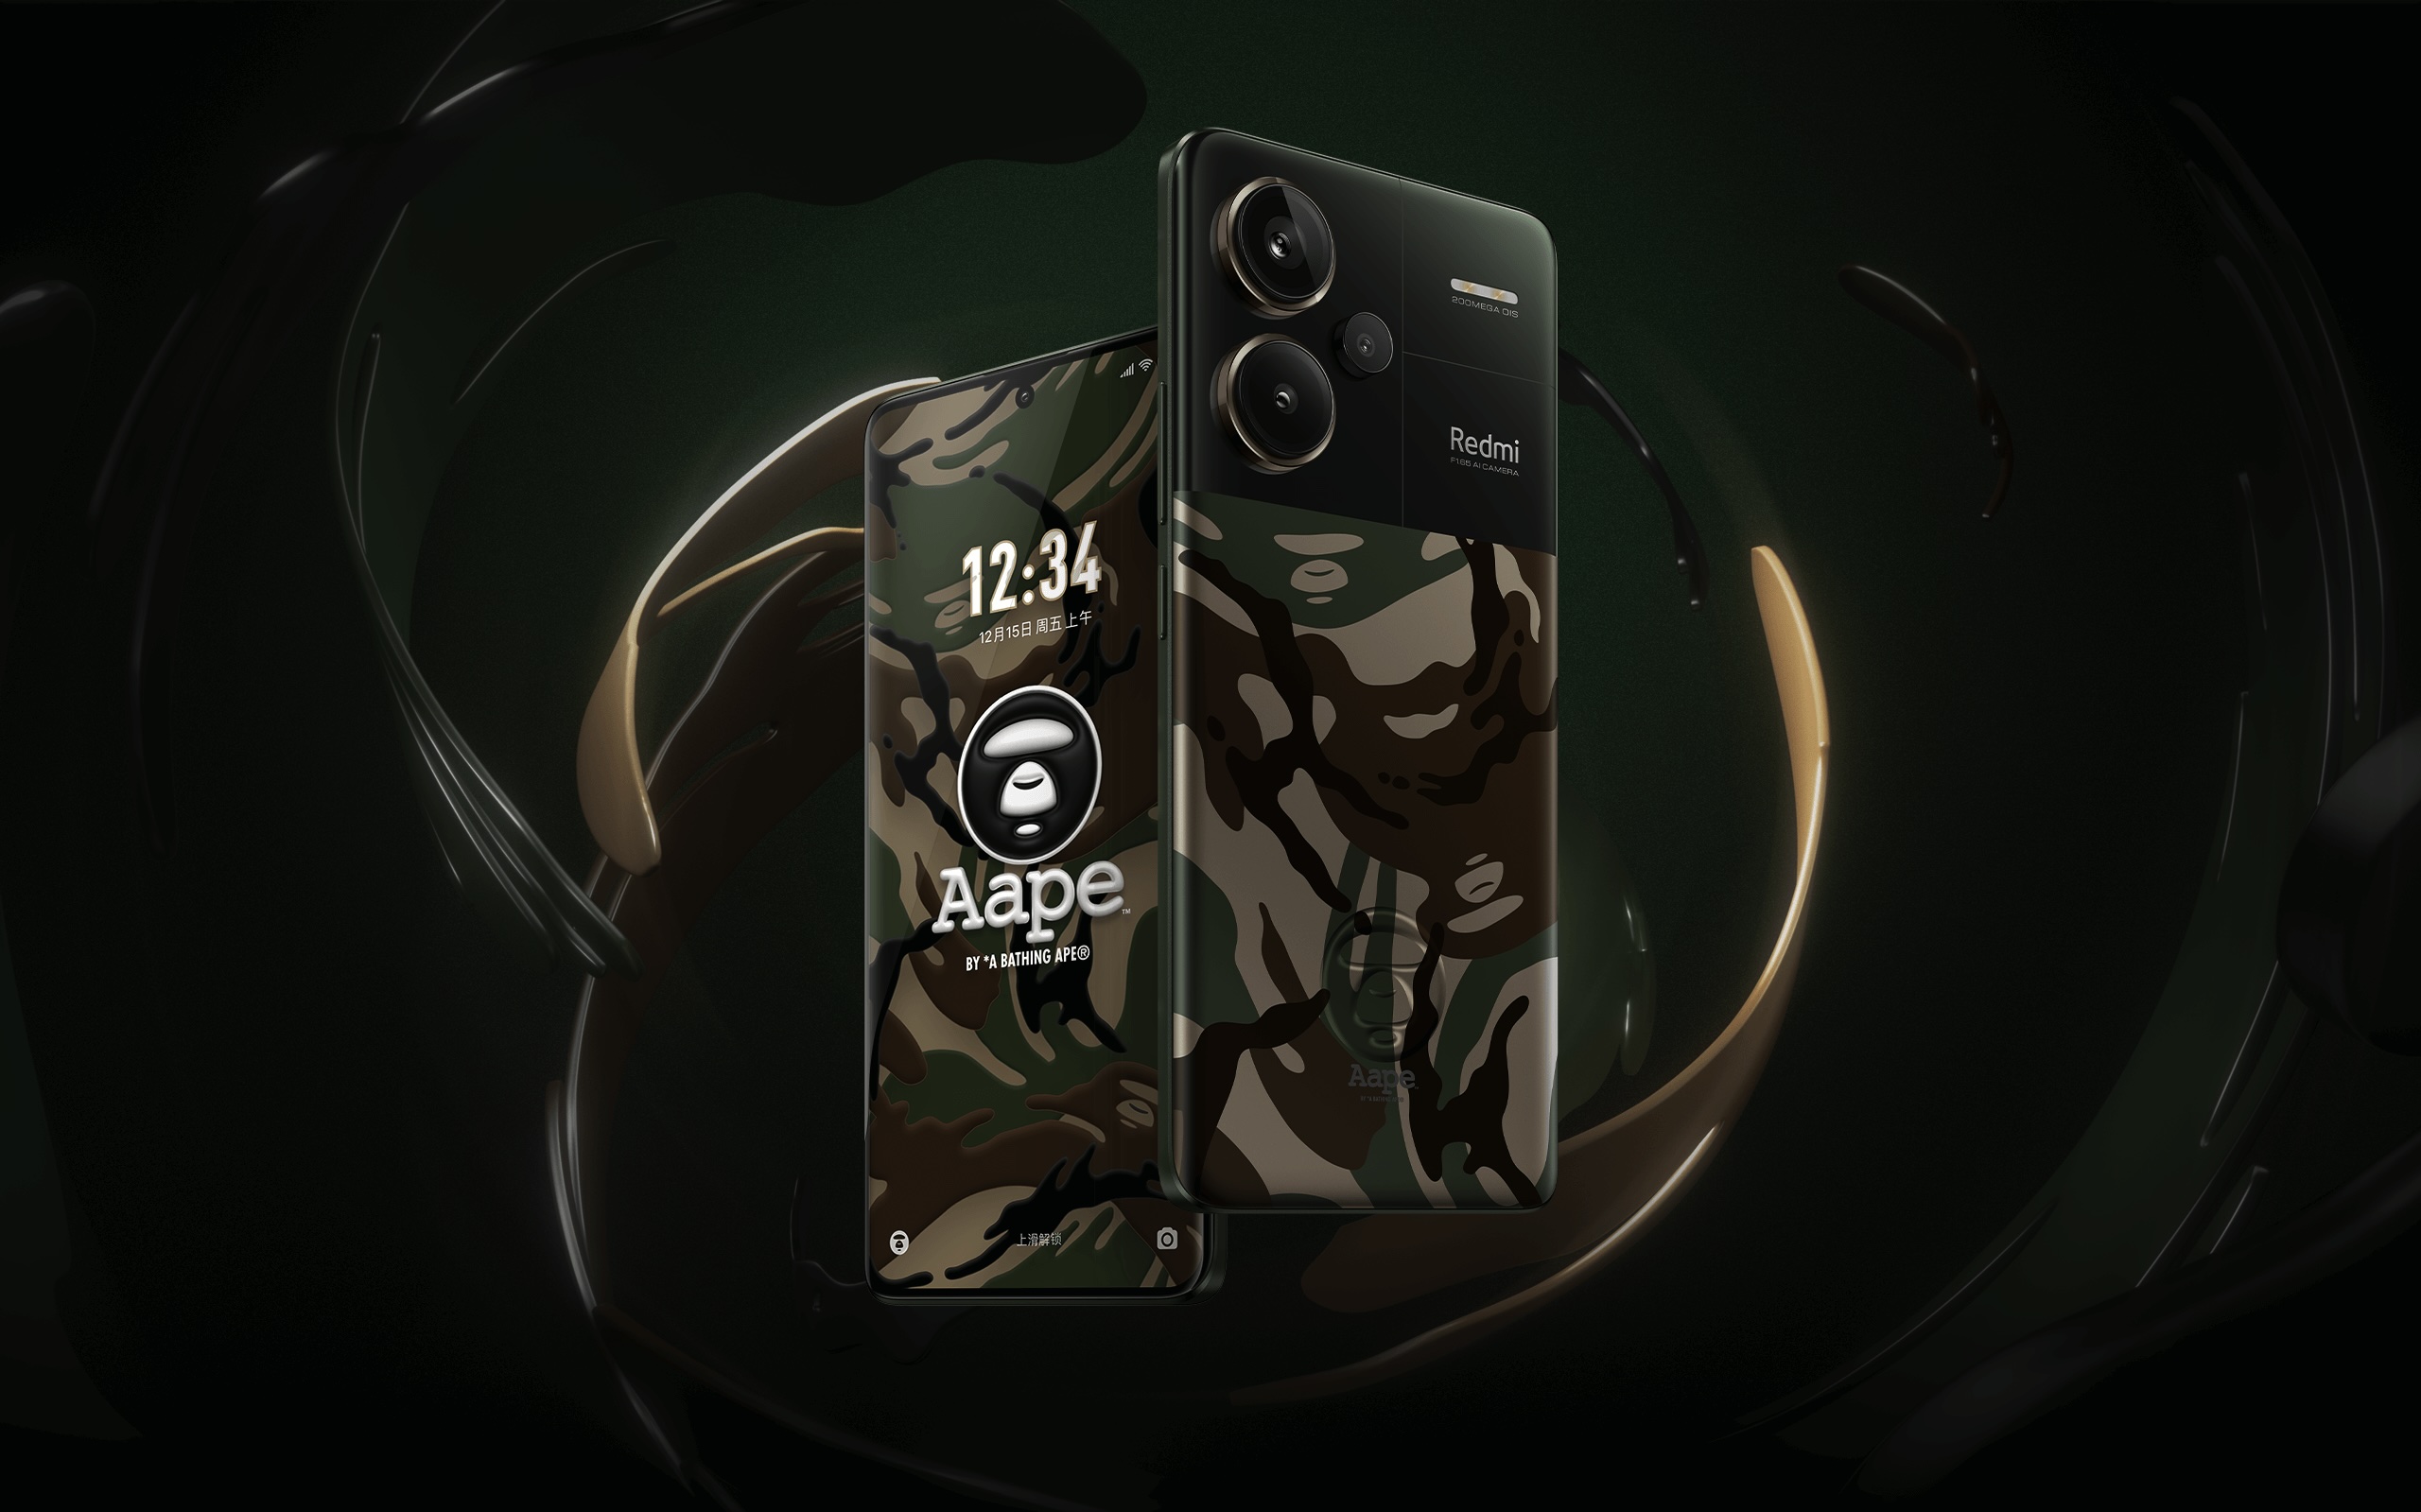 The Redmi Note 13 Pro+ has a Hype AAPE Collab